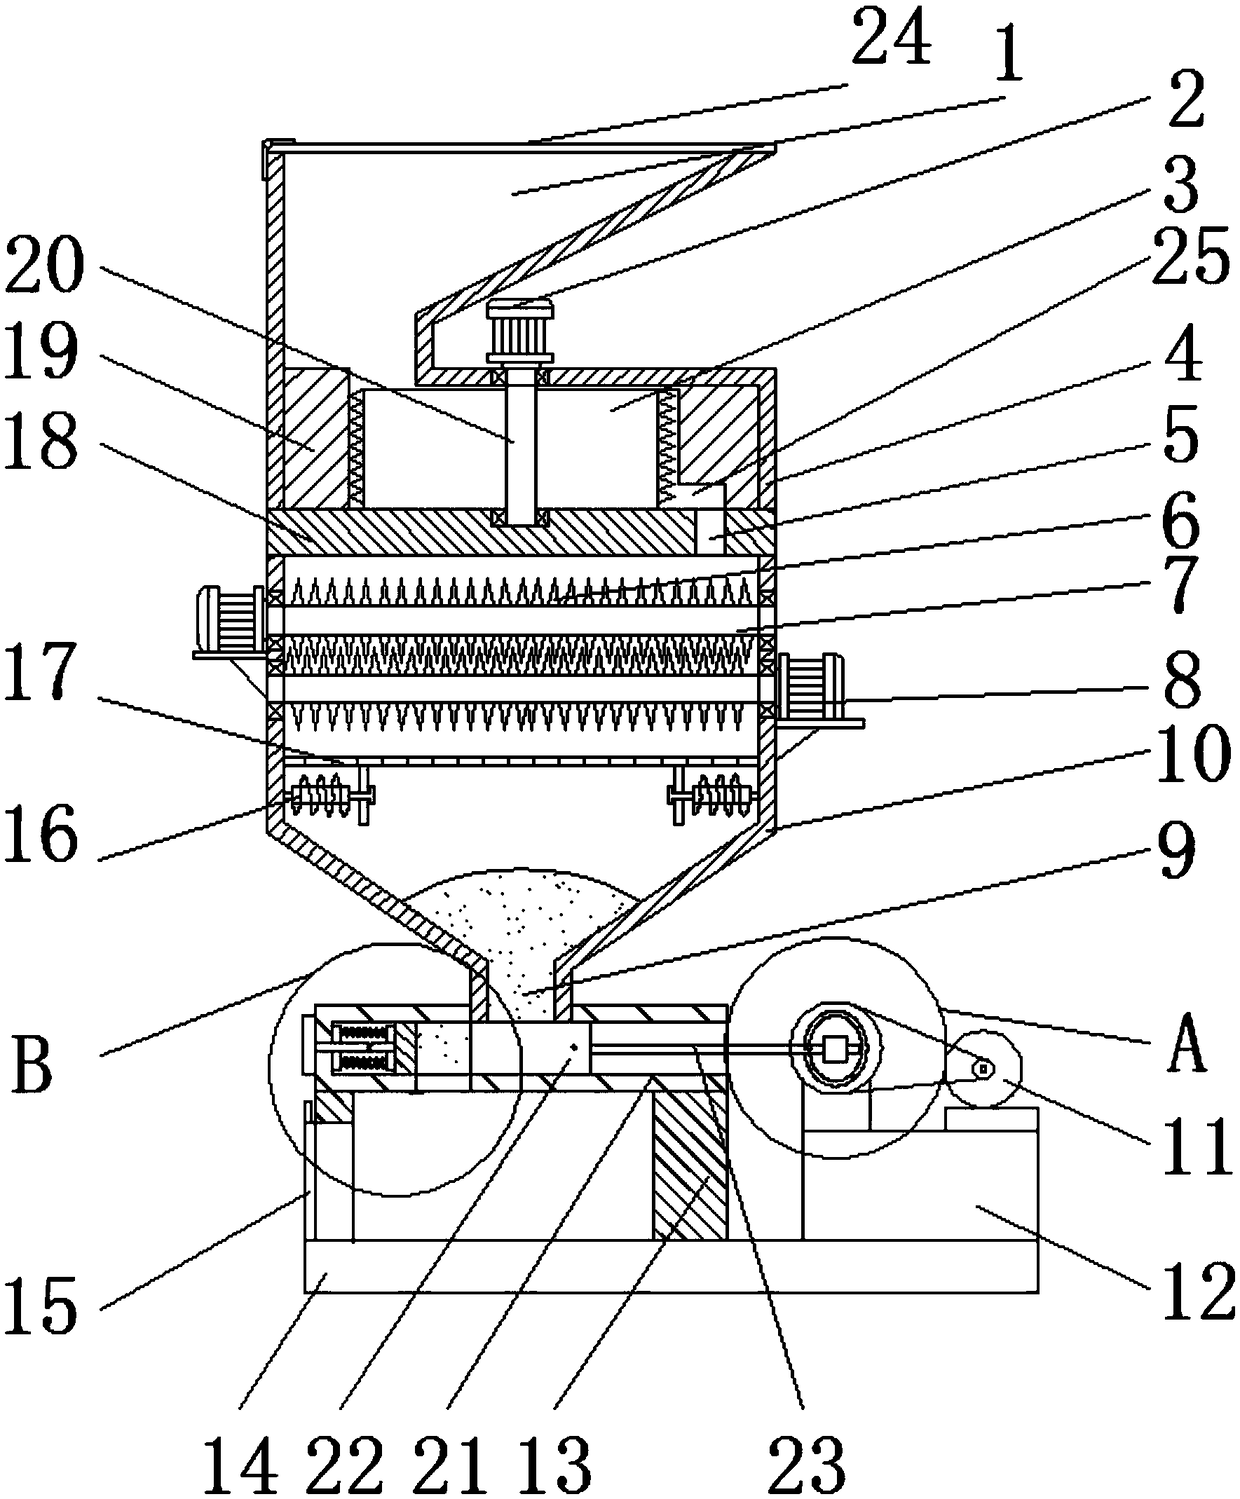 Treatment device for building material processing wood chips